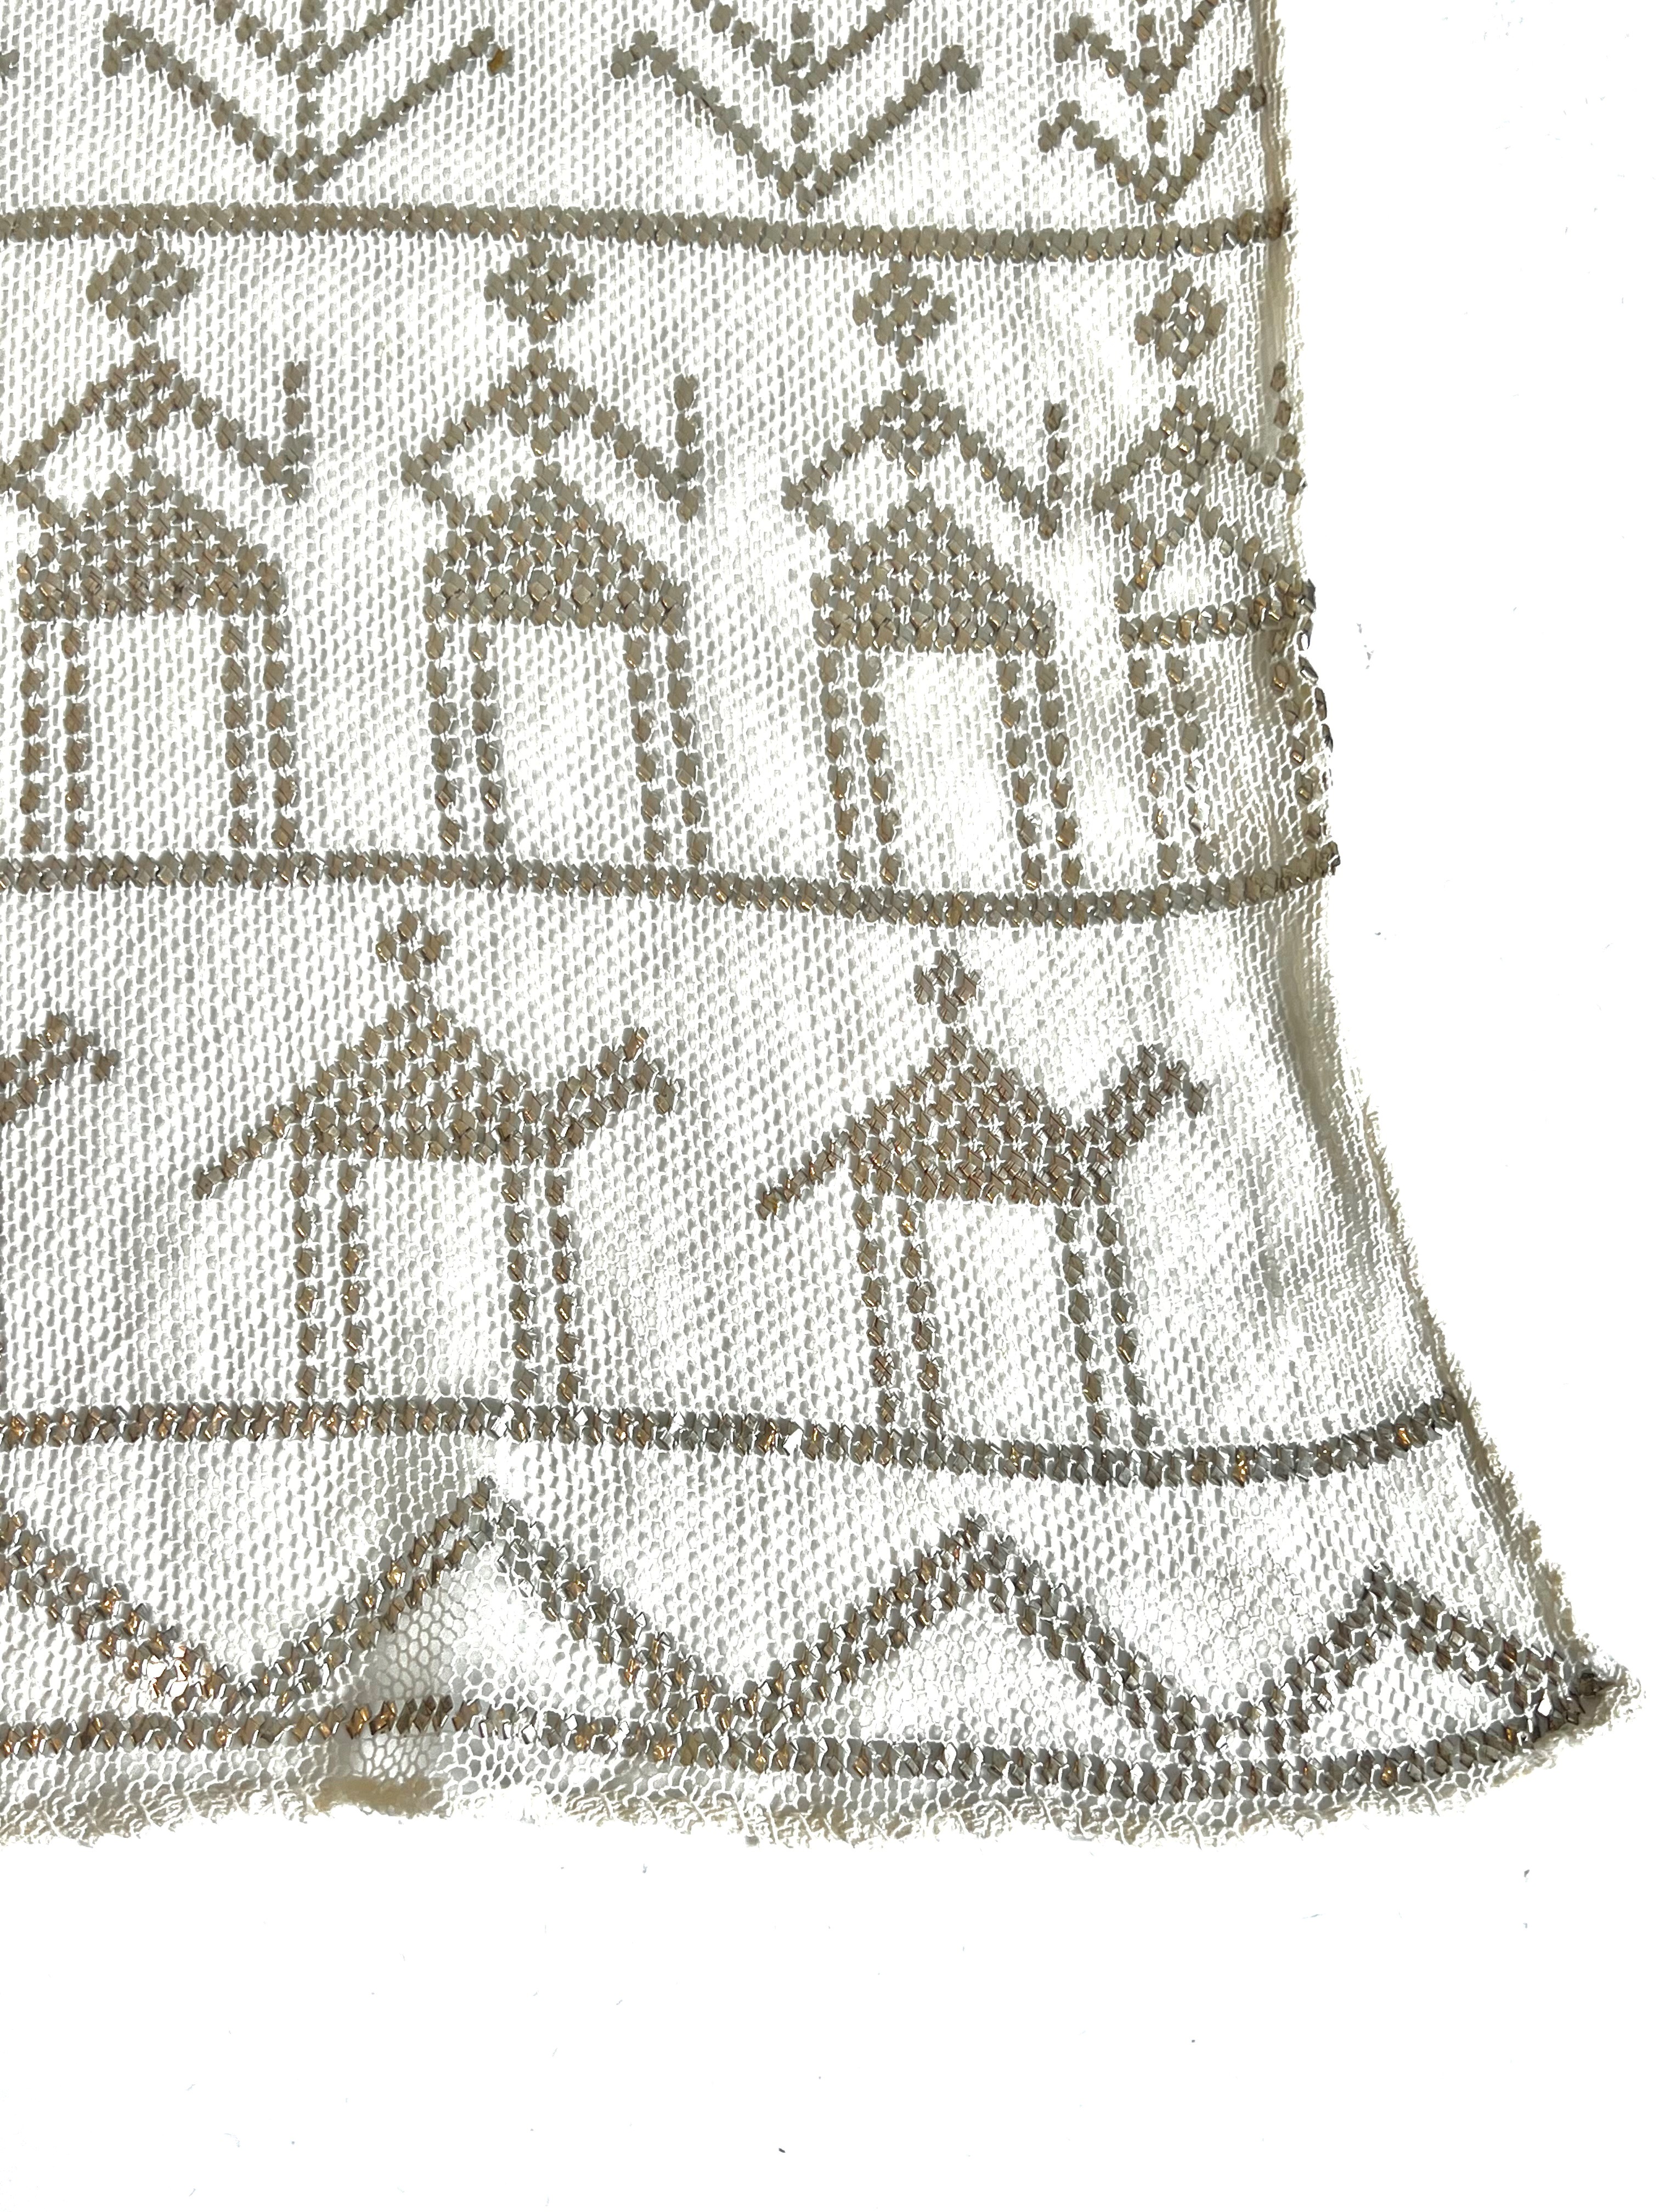 An Egyptian Assuit shawl - mid-20th century, in ivory cotton gauze with decoration of foliage, - Image 3 of 4